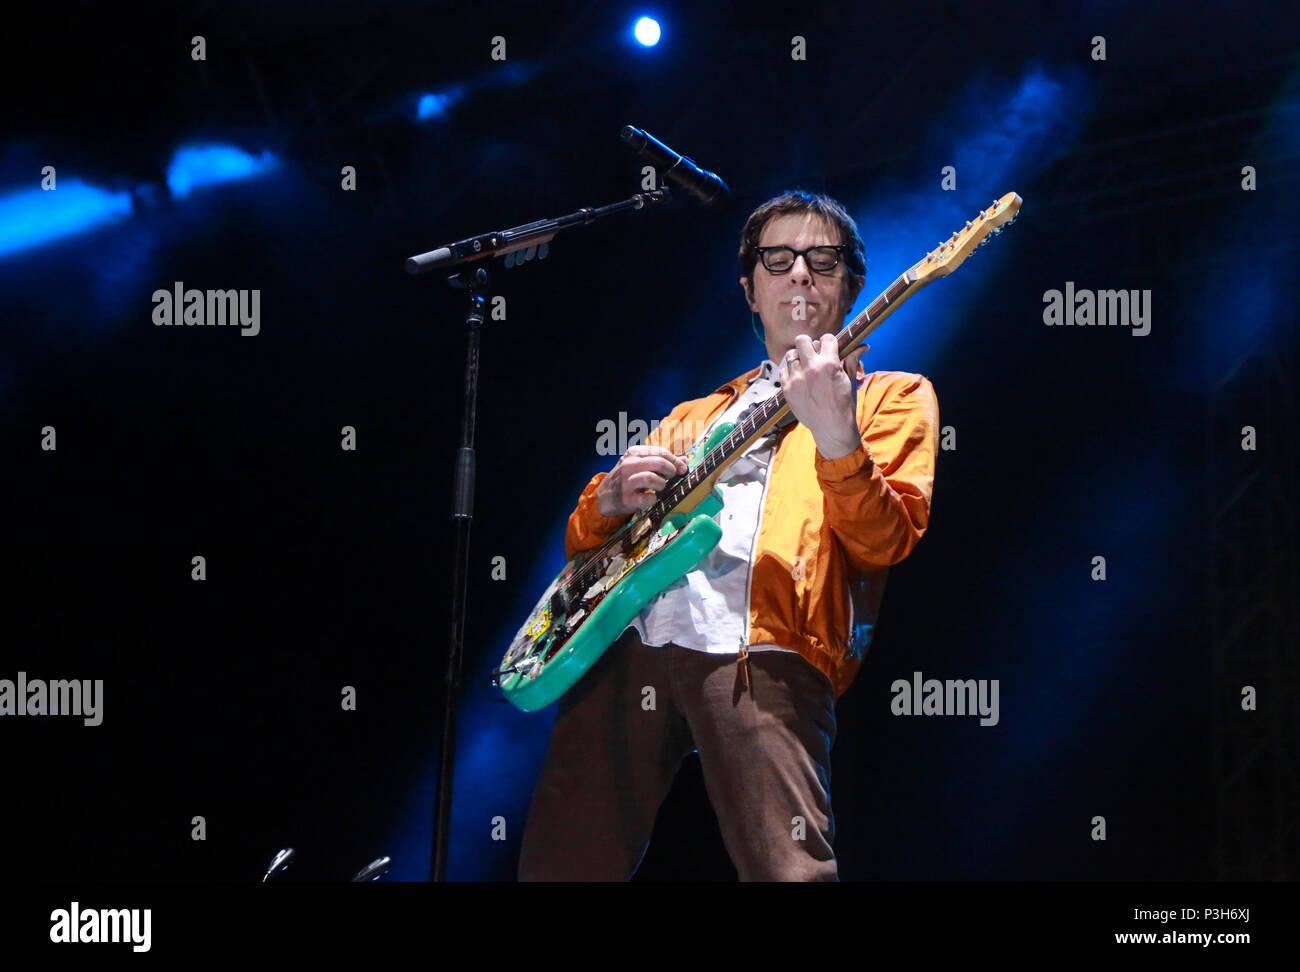 Florida, USA. 18th June, 2018. Weezer performs on the Ford Stage at SunFest in West Palm Beach Wednesday, May 3, 2017. Credit: Handout/The Palm Beach Post/ZUMA Wire/Alamy Live News Stock Photo